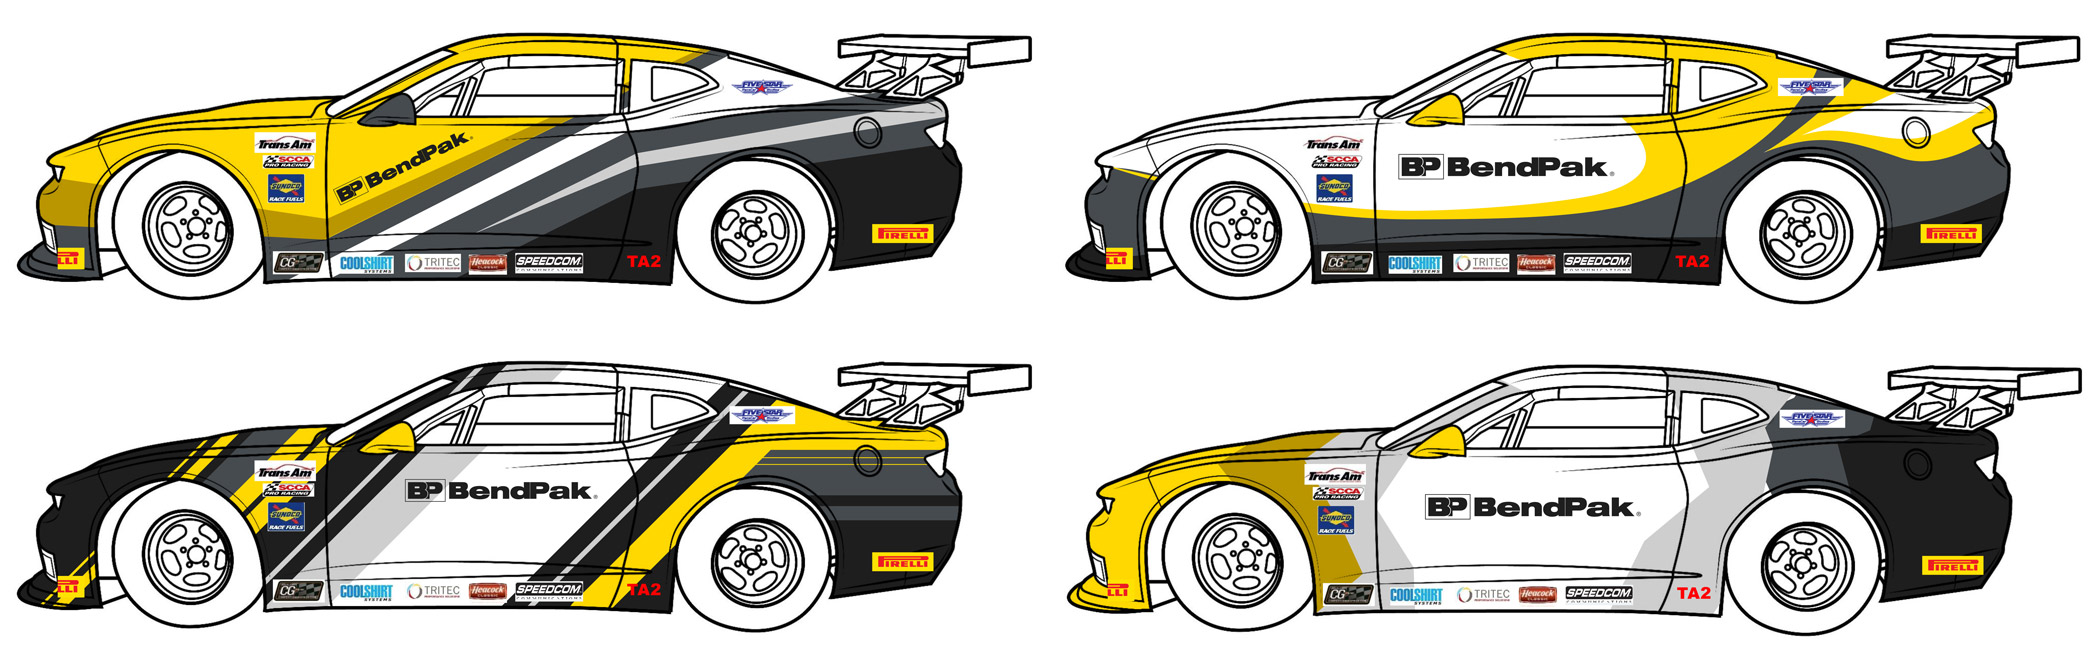 Parson's Racing - Livery Designs